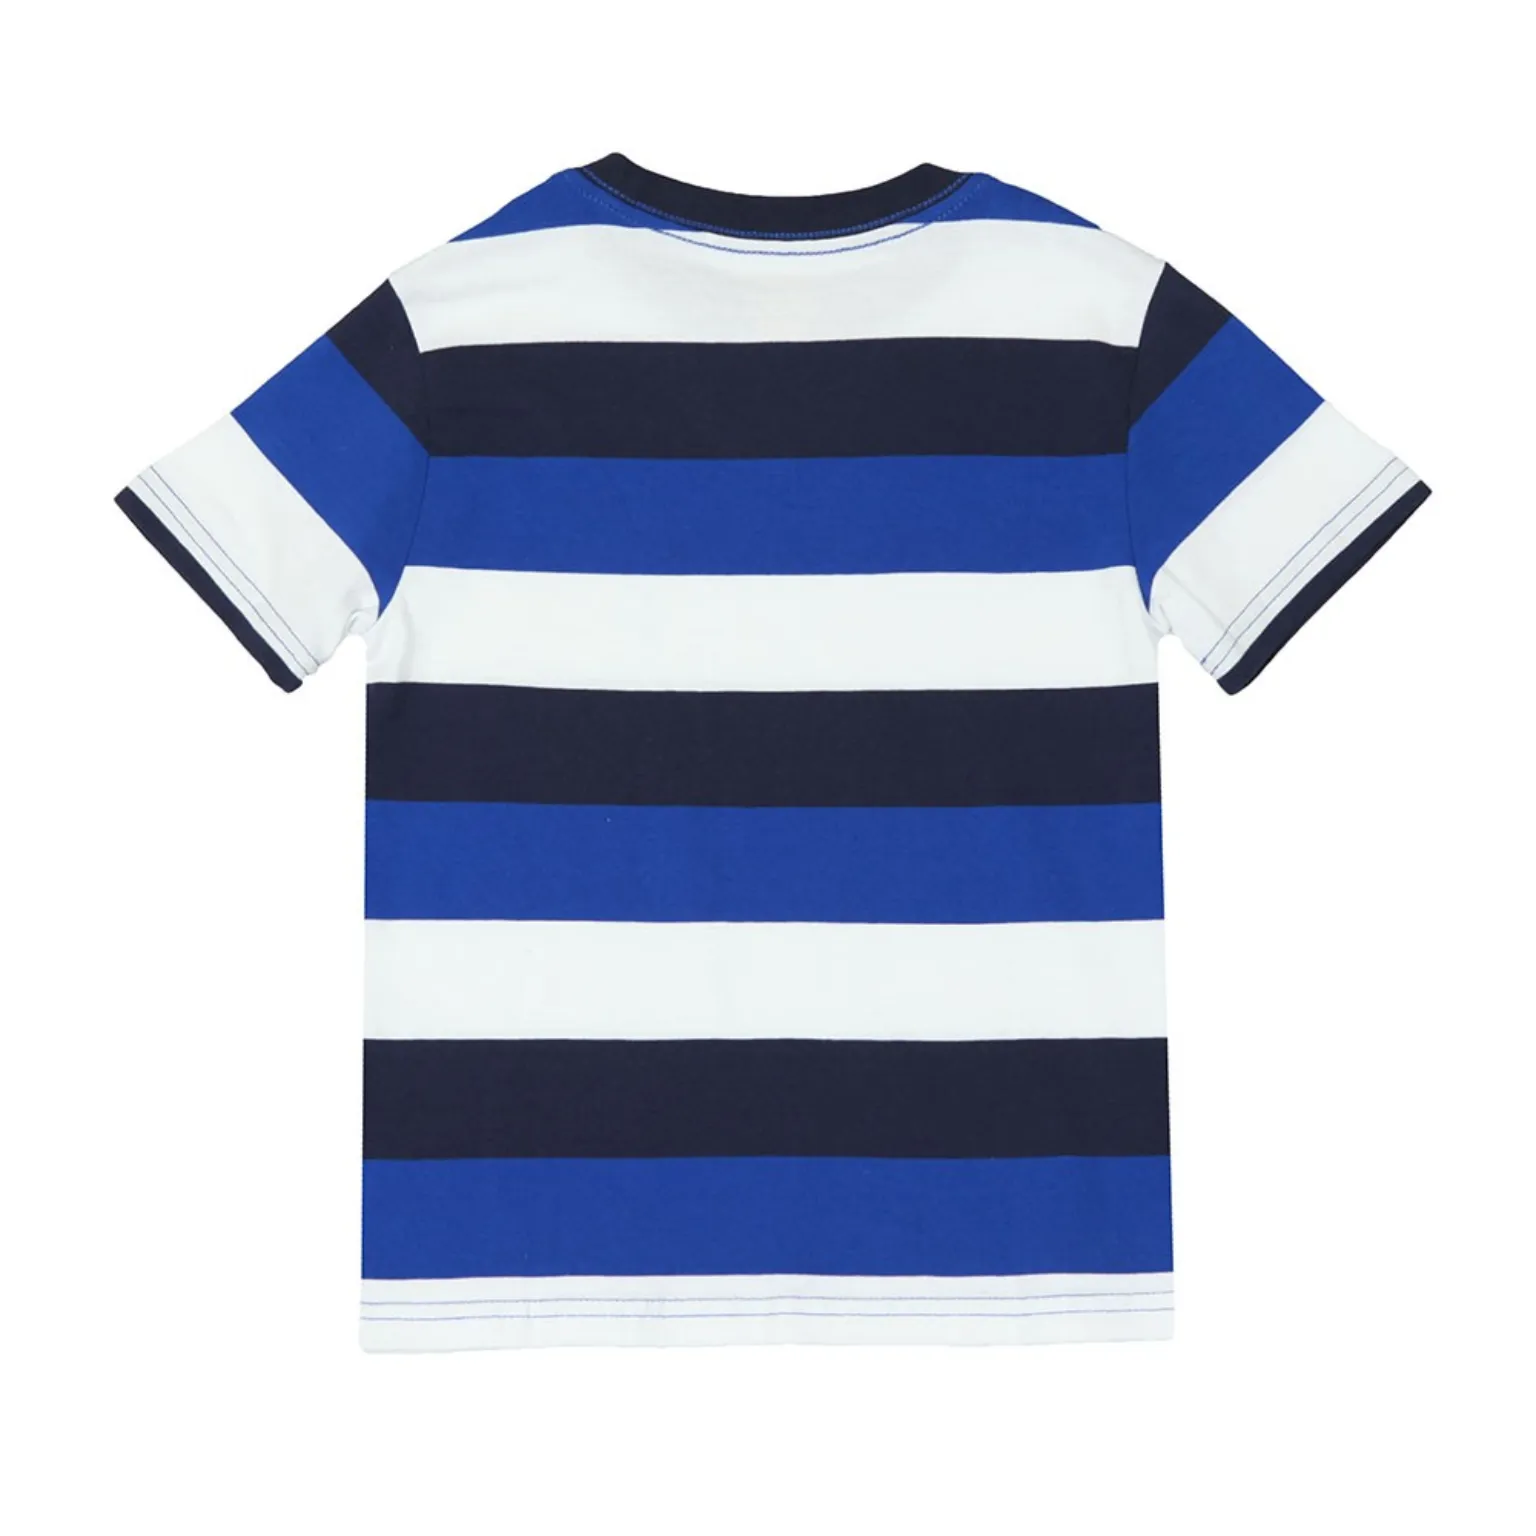 Manufacturing Boys Striped T-Shirt with custom designs.